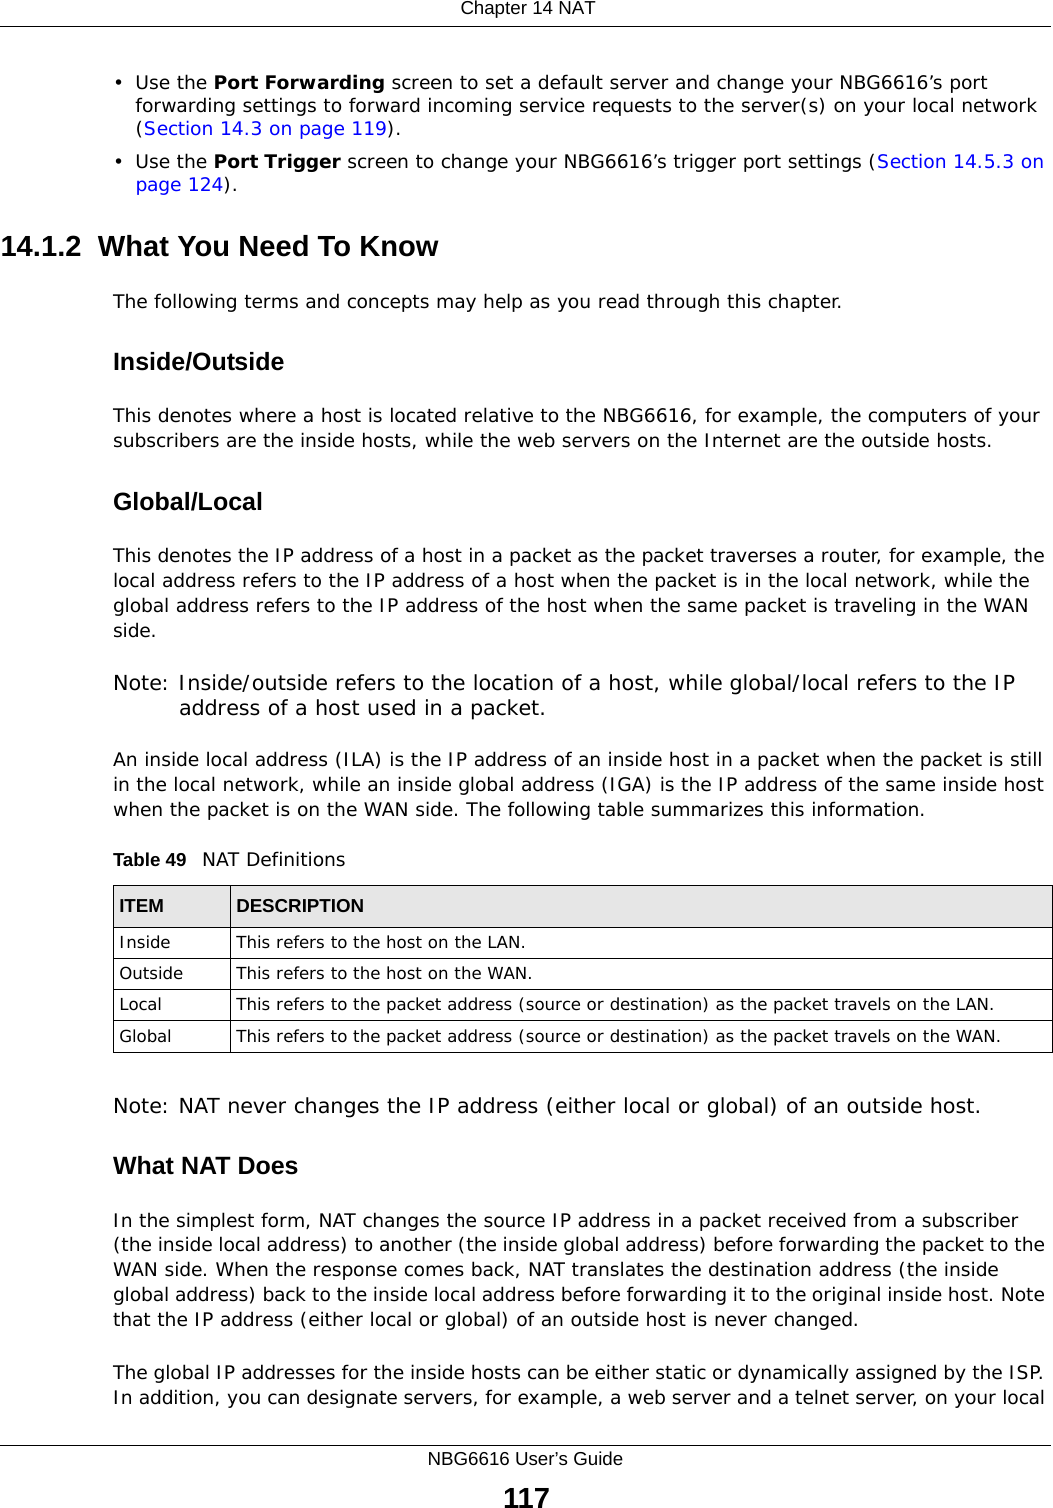  Chapter 14 NATNBG6616 User’s Guide117•Use the Port Forwarding screen to set a default server and change your NBG6616’s port forwarding settings to forward incoming service requests to the server(s) on your local network (Section 14.3 on page 119).•Use the Port Trigger screen to change your NBG6616’s trigger port settings (Section 14.5.3 on page 124).14.1.2  What You Need To KnowThe following terms and concepts may help as you read through this chapter.Inside/OutsideThis denotes where a host is located relative to the NBG6616, for example, the computers of your subscribers are the inside hosts, while the web servers on the Internet are the outside hosts. Global/Local This denotes the IP address of a host in a packet as the packet traverses a router, for example, the local address refers to the IP address of a host when the packet is in the local network, while the global address refers to the IP address of the host when the same packet is traveling in the WAN side. Note: Inside/outside refers to the location of a host, while global/local refers to the IP address of a host used in a packet. An inside local address (ILA) is the IP address of an inside host in a packet when the packet is still in the local network, while an inside global address (IGA) is the IP address of the same inside host when the packet is on the WAN side. The following table summarizes this information.Note: NAT never changes the IP address (either local or global) of an outside host.What NAT DoesIn the simplest form, NAT changes the source IP address in a packet received from a subscriber (the inside local address) to another (the inside global address) before forwarding the packet to the WAN side. When the response comes back, NAT translates the destination address (the inside global address) back to the inside local address before forwarding it to the original inside host. Note that the IP address (either local or global) of an outside host is never changed.The global IP addresses for the inside hosts can be either static or dynamically assigned by the ISP. In addition, you can designate servers, for example, a web server and a telnet server, on your local Table 49   NAT DefinitionsITEM DESCRIPTIONInside This refers to the host on the LAN.Outside This refers to the host on the WAN.Local This refers to the packet address (source or destination) as the packet travels on the LAN.Global This refers to the packet address (source or destination) as the packet travels on the WAN.